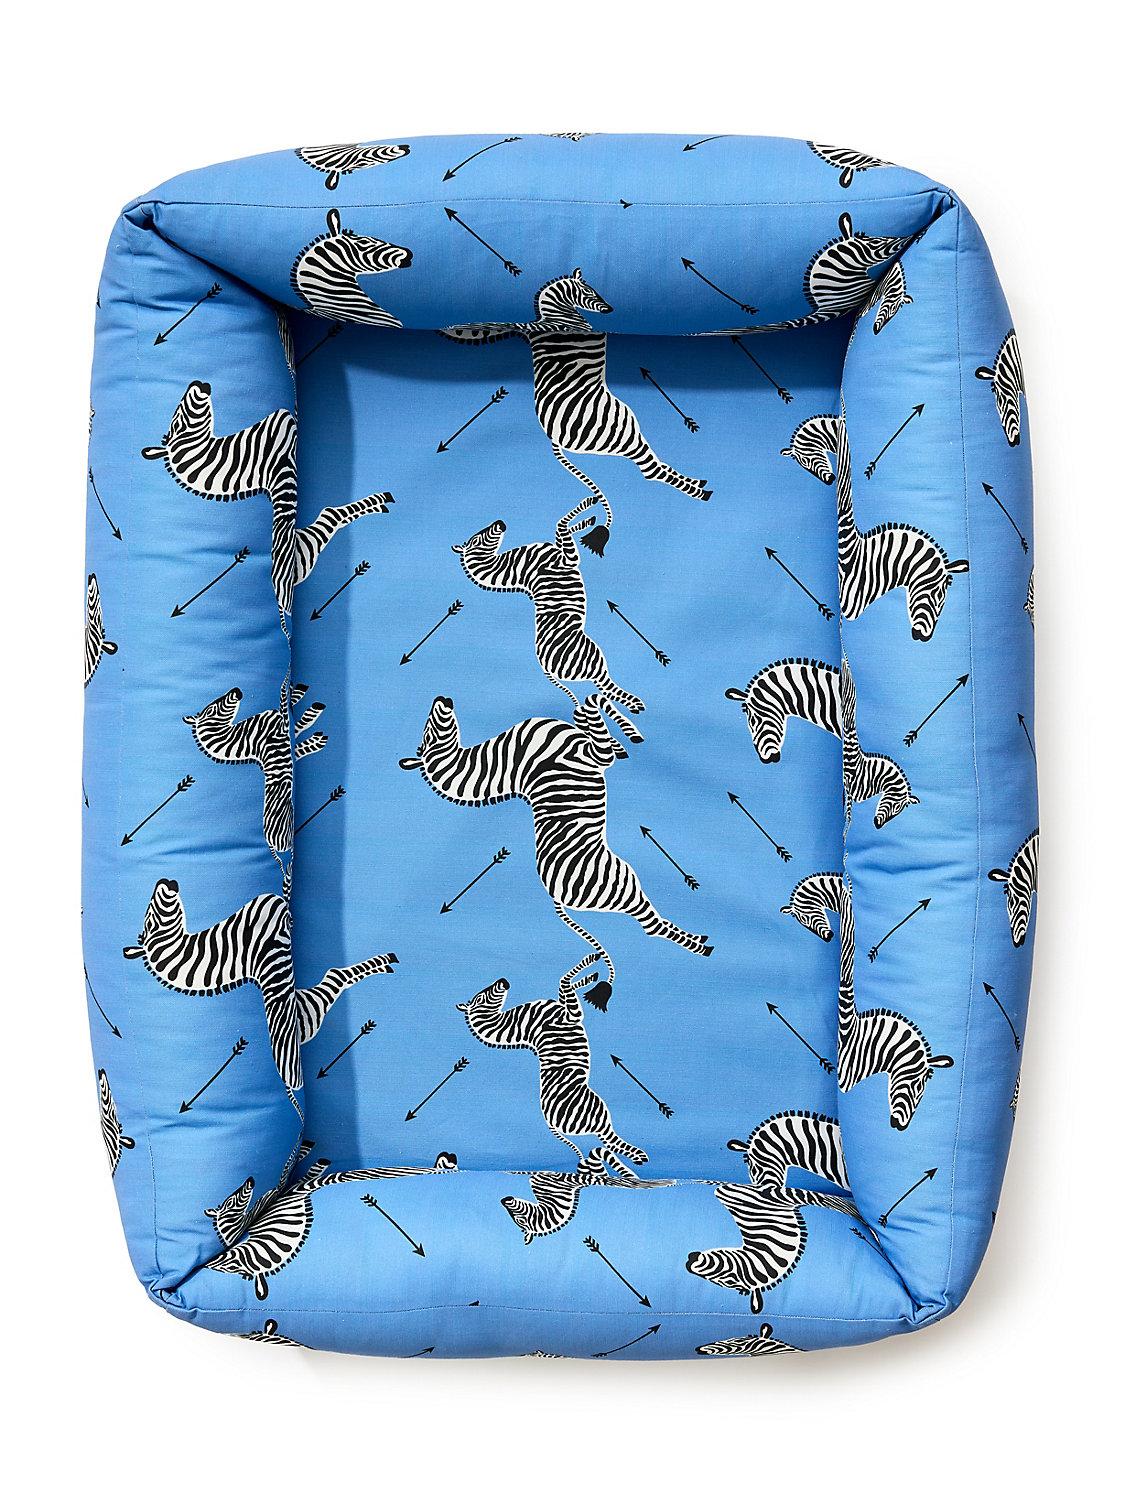 Scalamandre Zebras Dog Bed Medium In New Condition For Sale In New York, NY